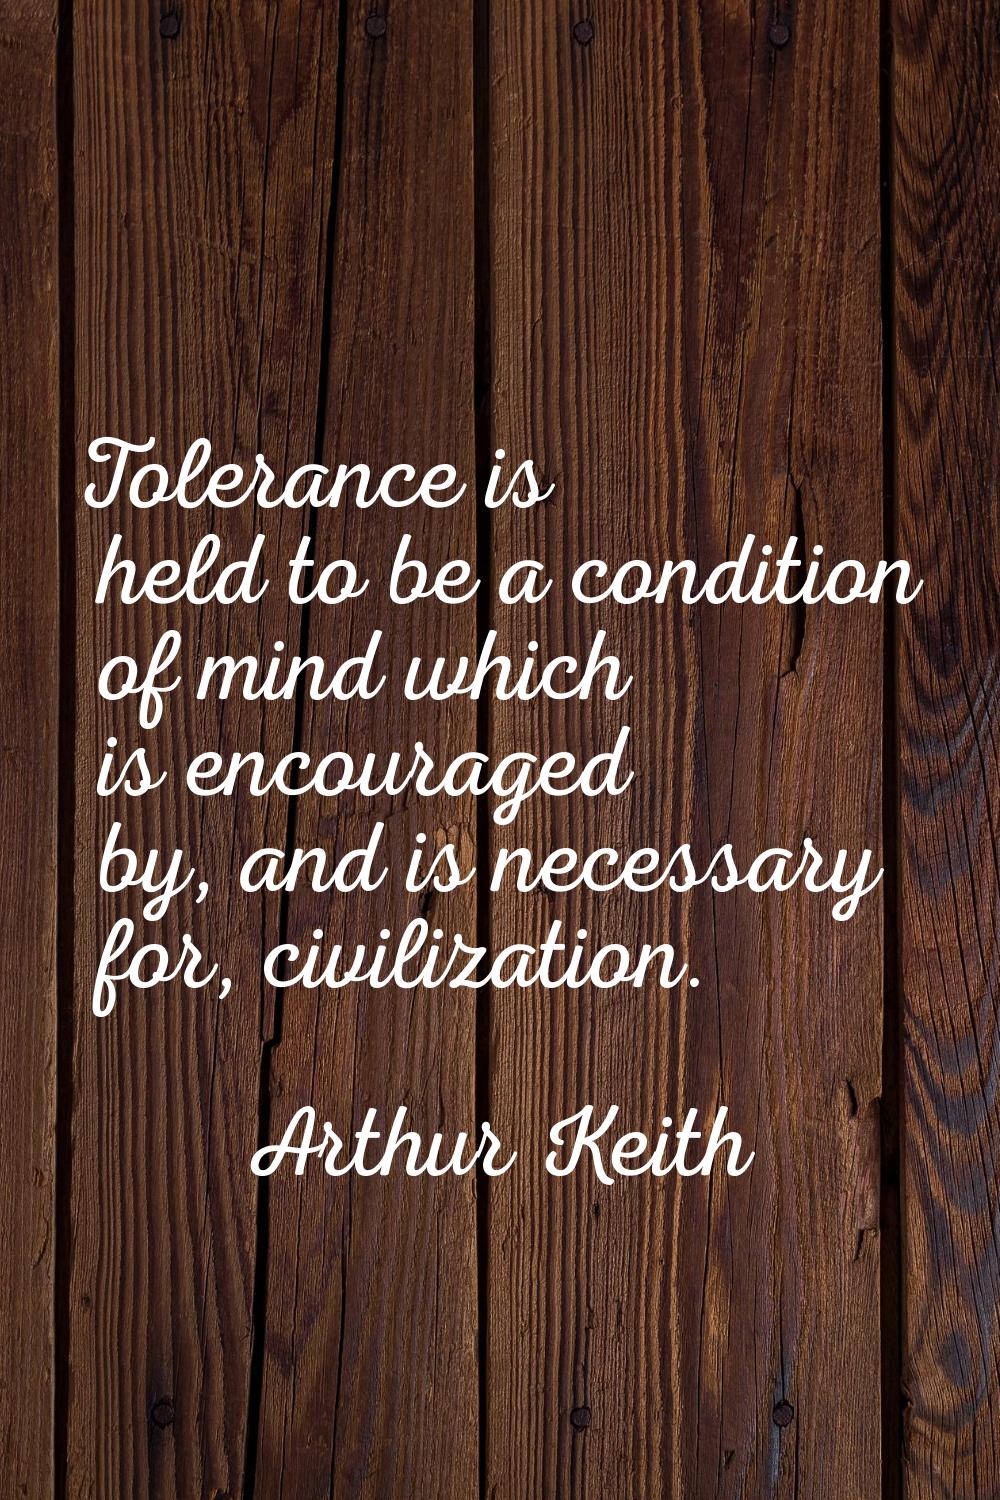 Tolerance is held to be a condition of mind which is encouraged by, and is necessary for, civilizat